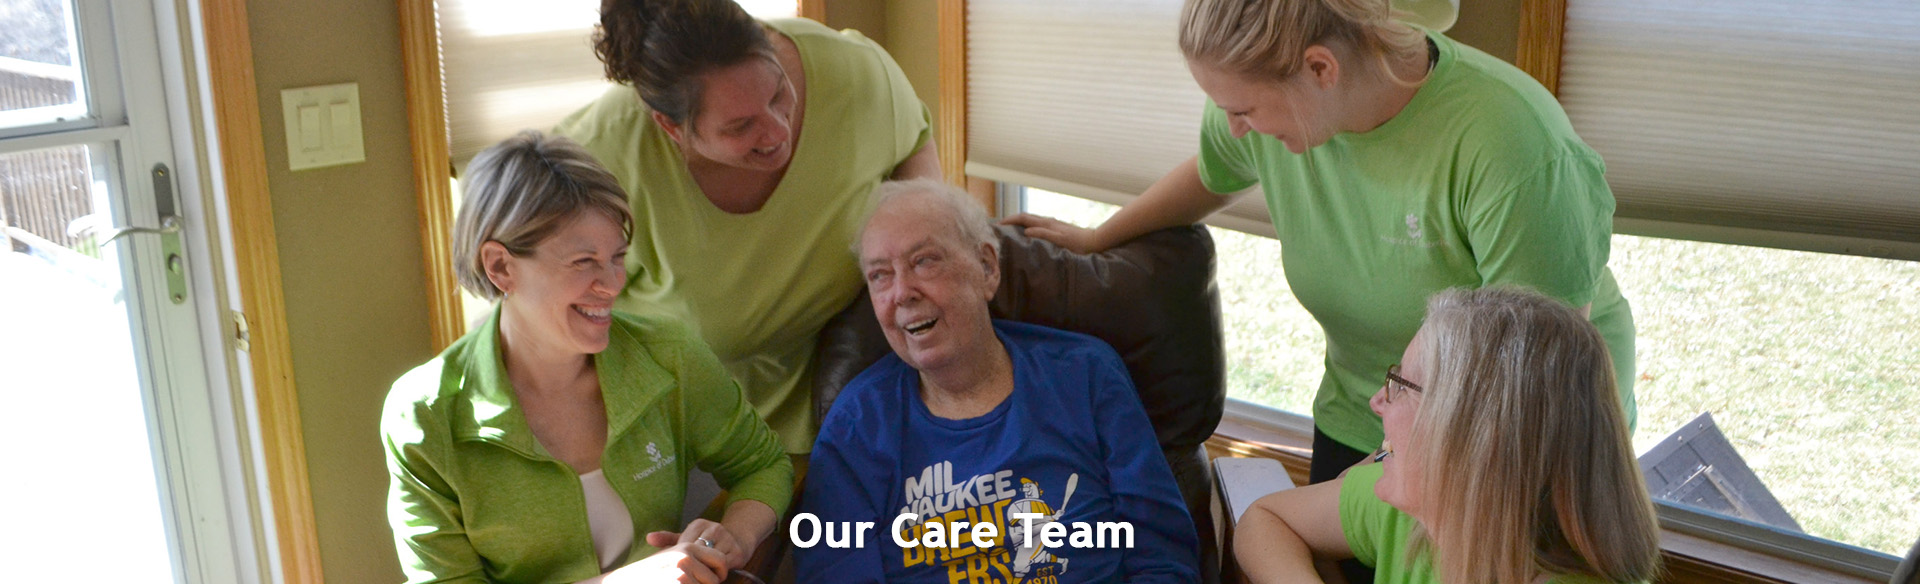 Our Care Team